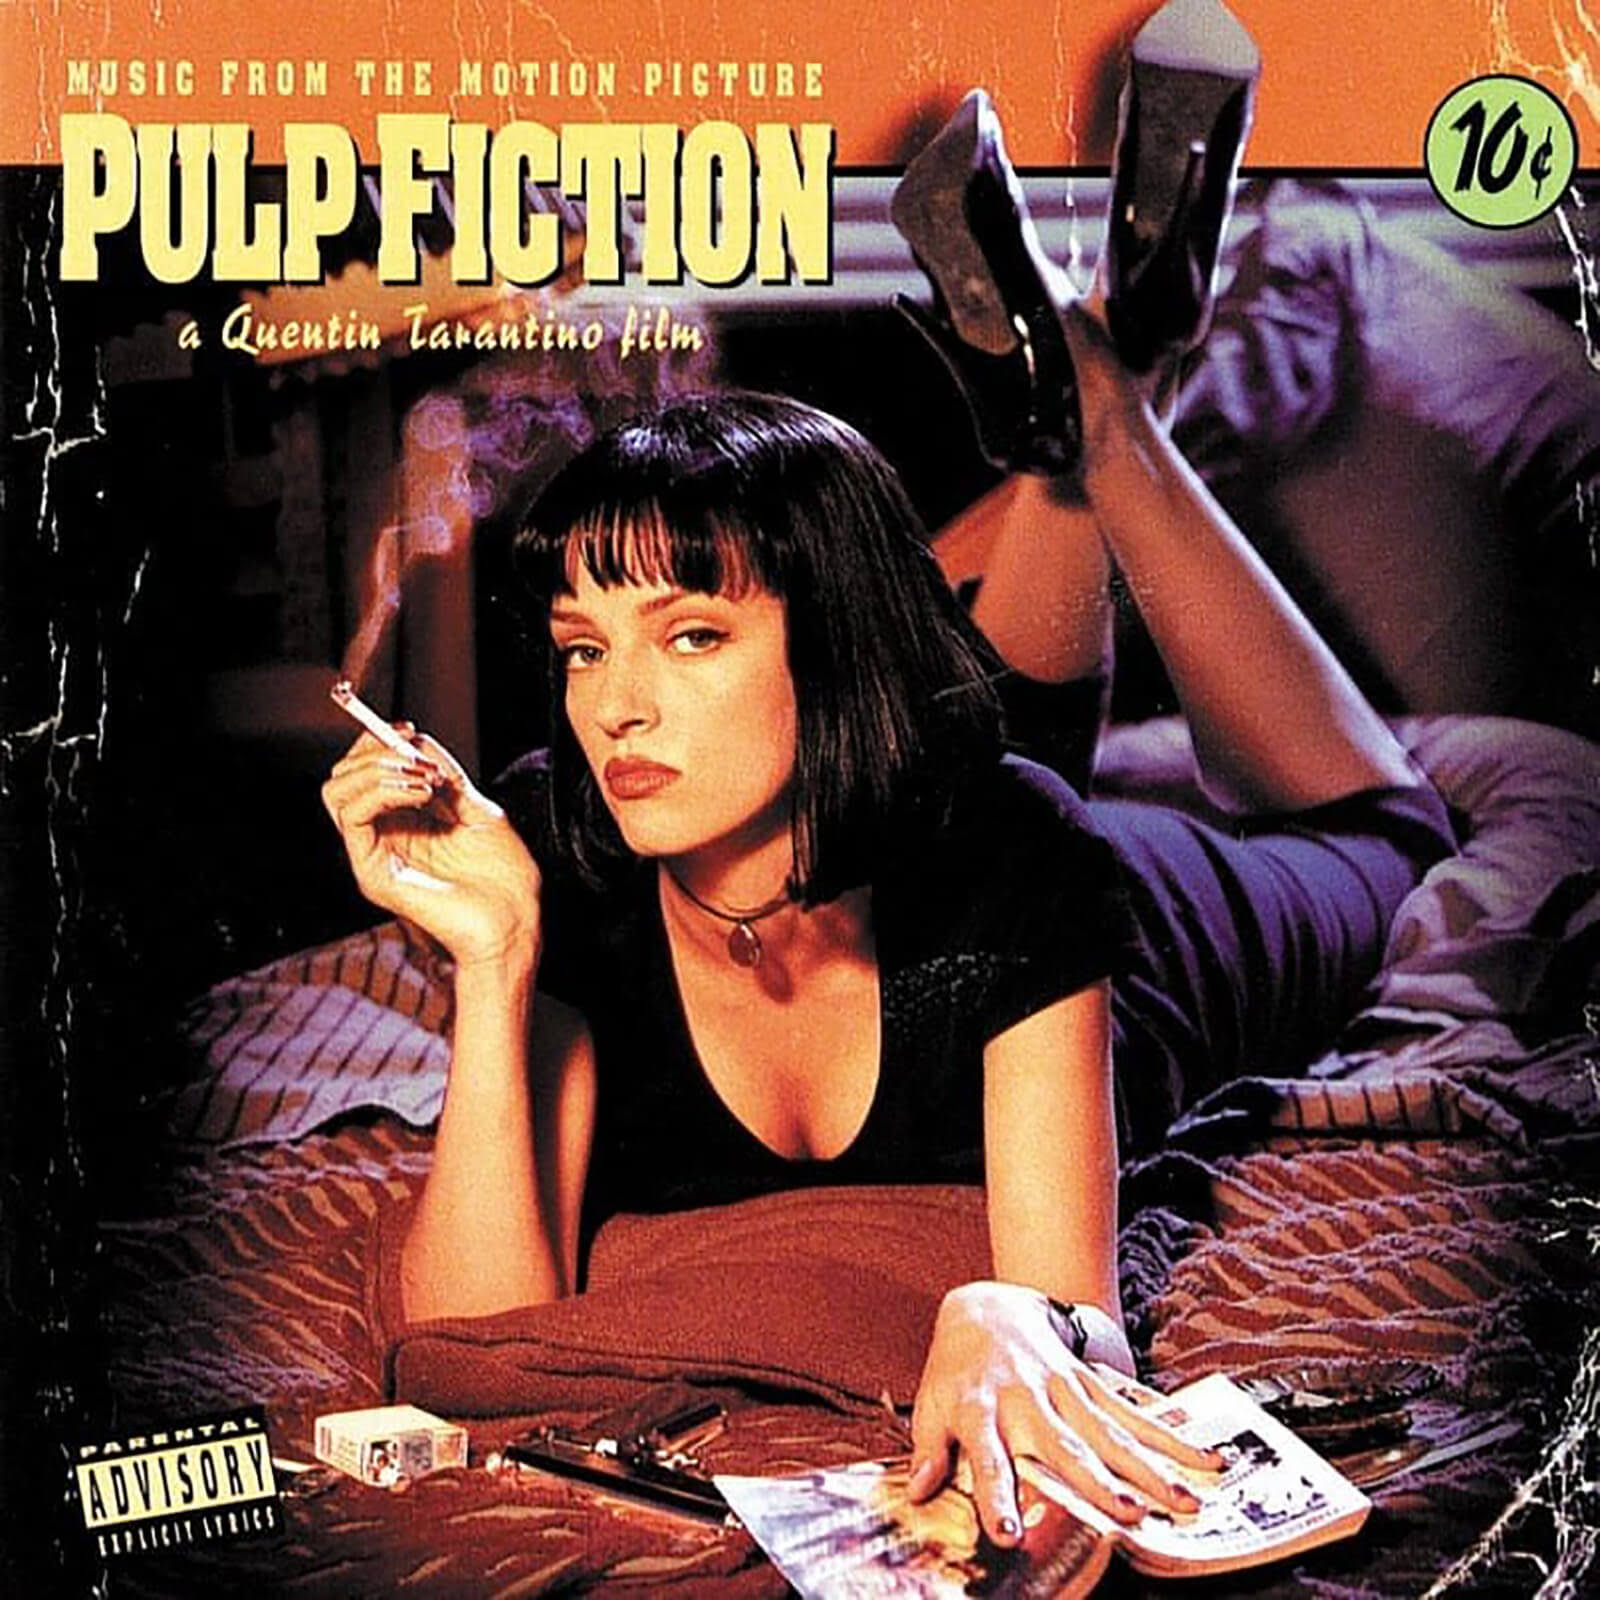 Pulp Fiction: Music From The Motion Picture